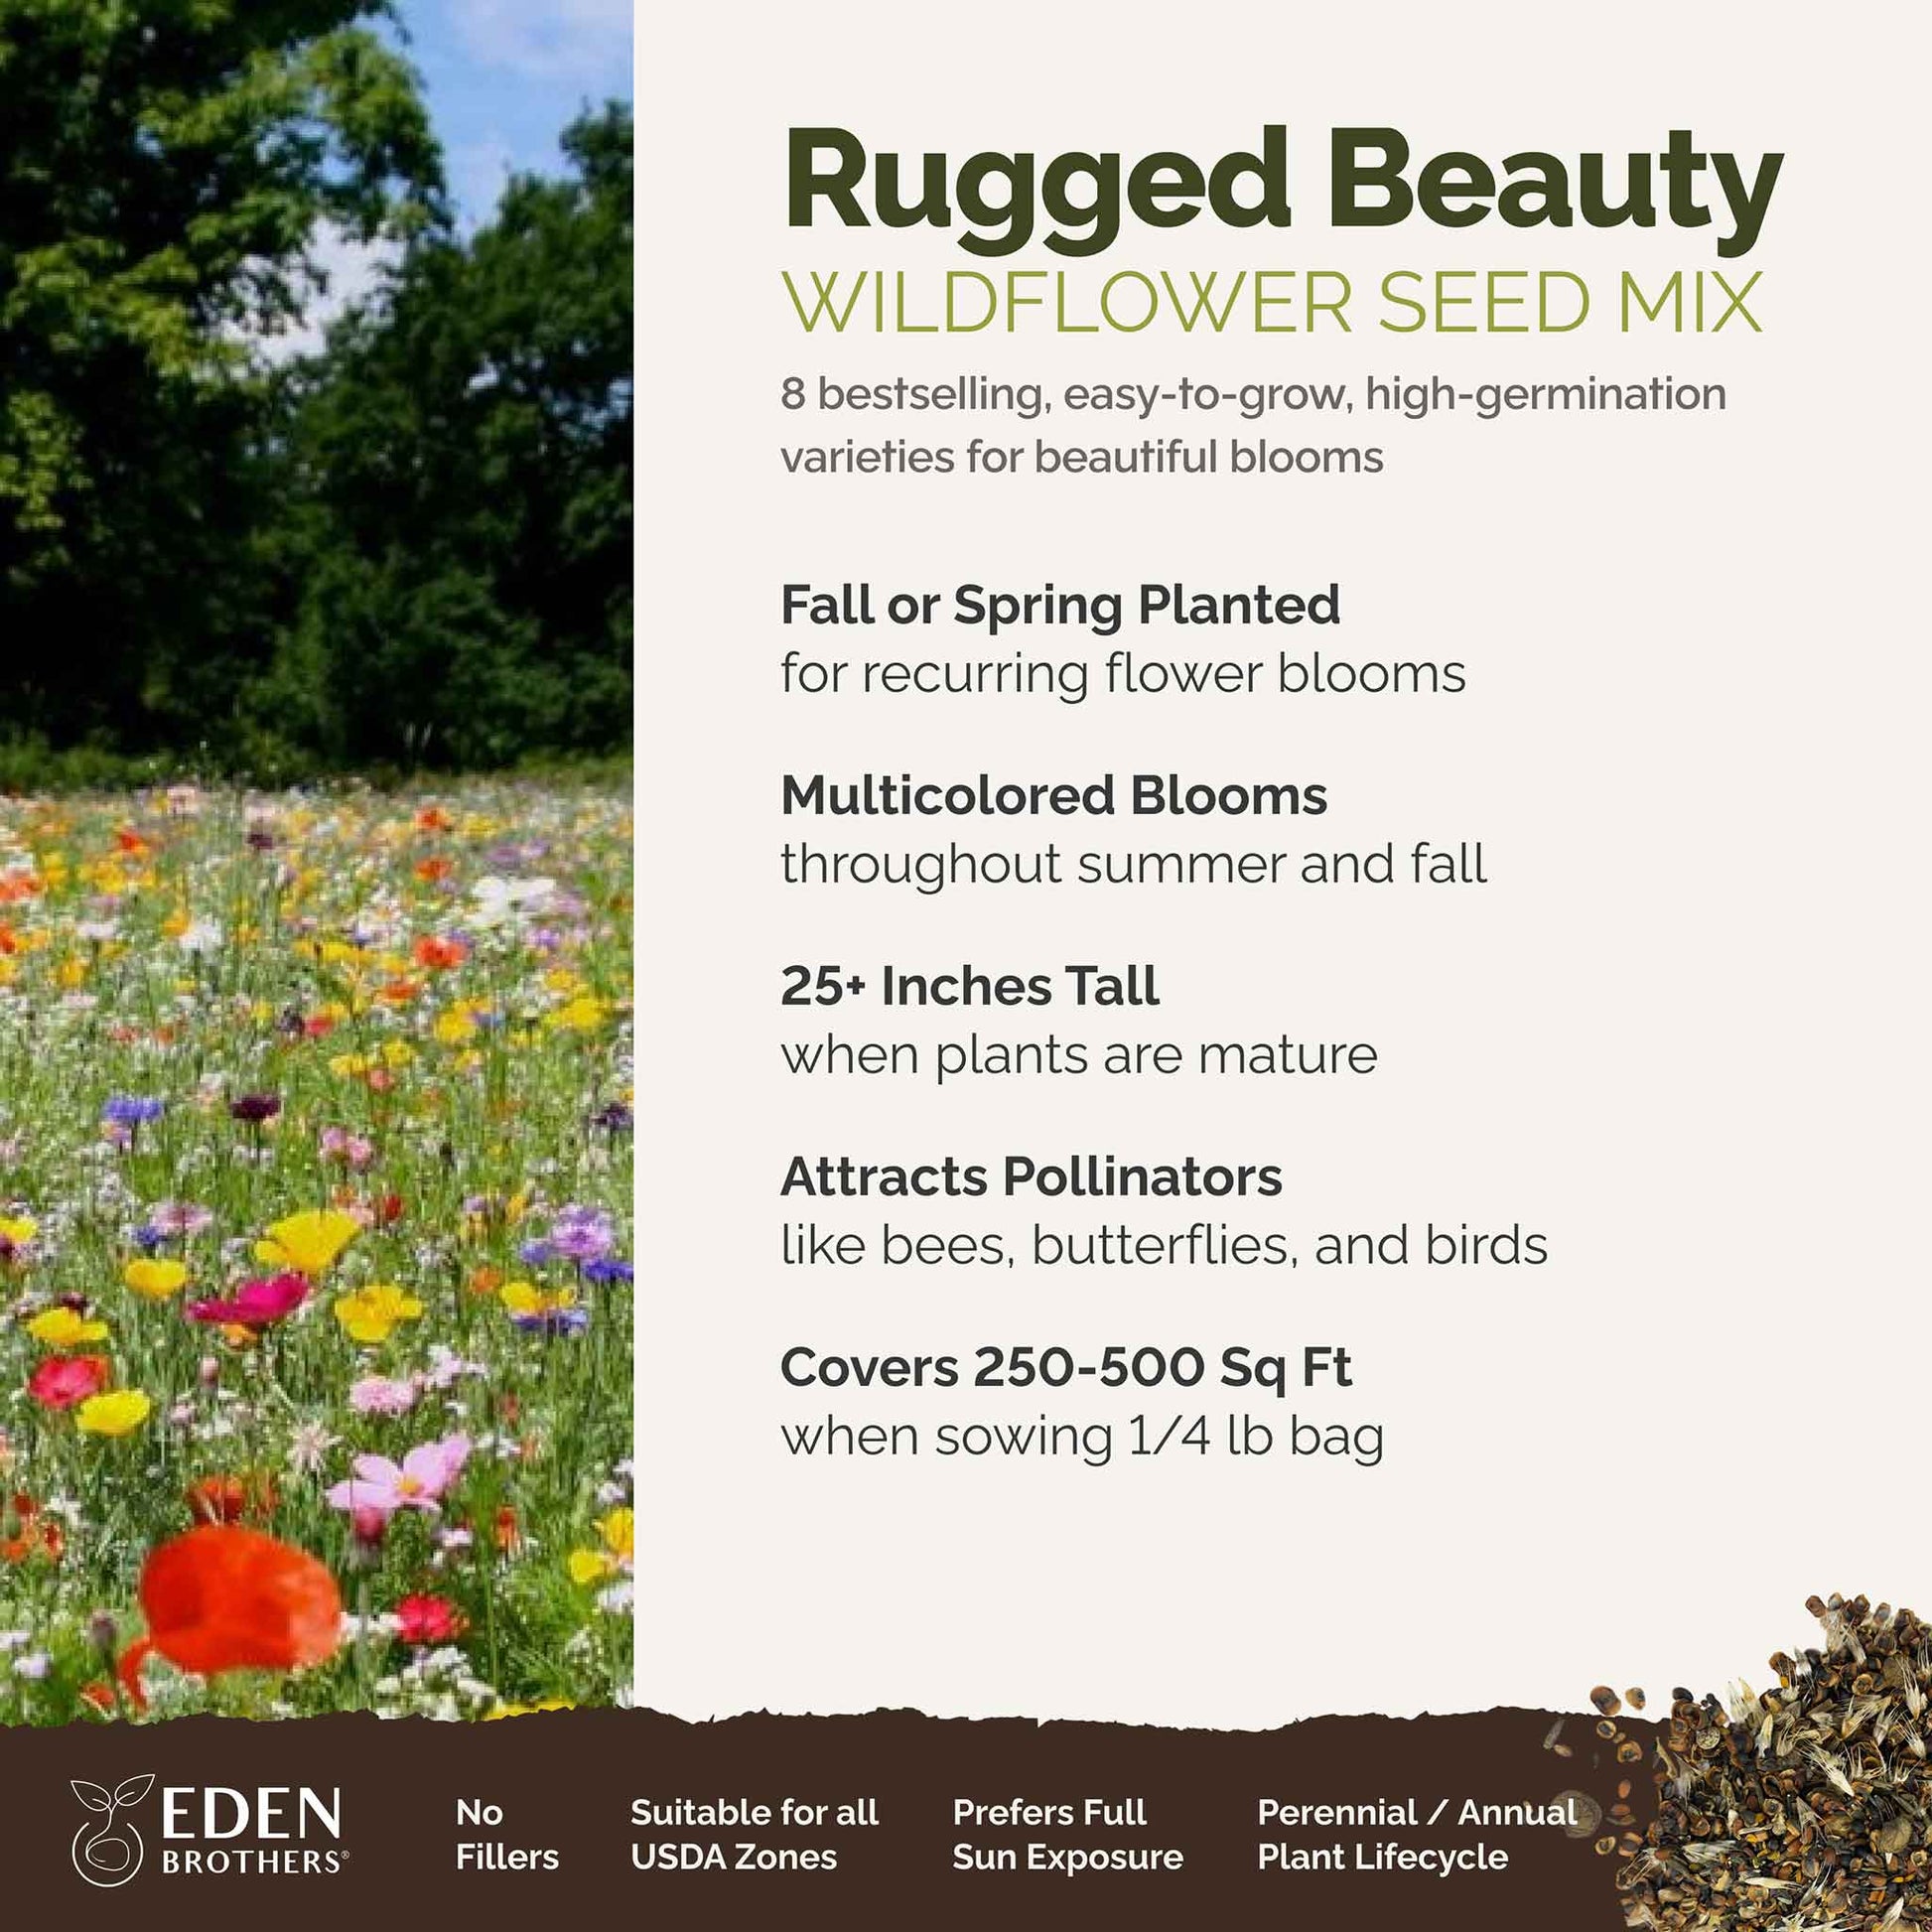 rugged beauty overview